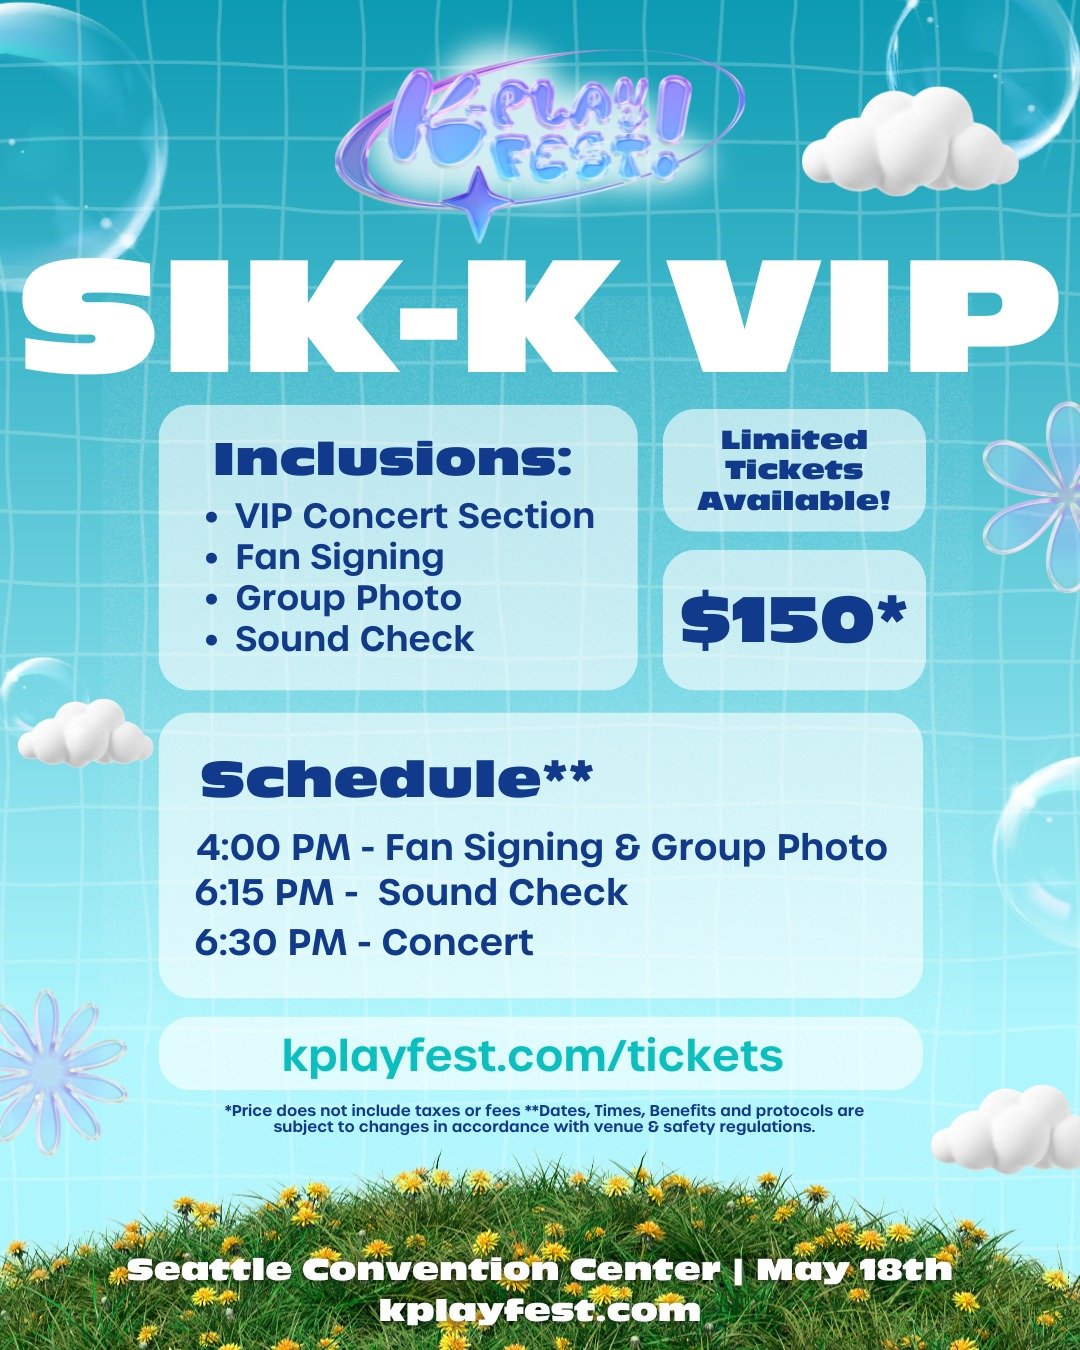 🔔 RING RING ‼️ You asked for it! Sik-K VIP package is now available! ✨Limited✨ quantities are now LIVE, so be sure to grab them before it's too late! 

VIP Package Inclusions:
🥇 VIP Concert Section
✍️ Fan Signing 
📸 Group Photo
🎤 Sound Check

💫 